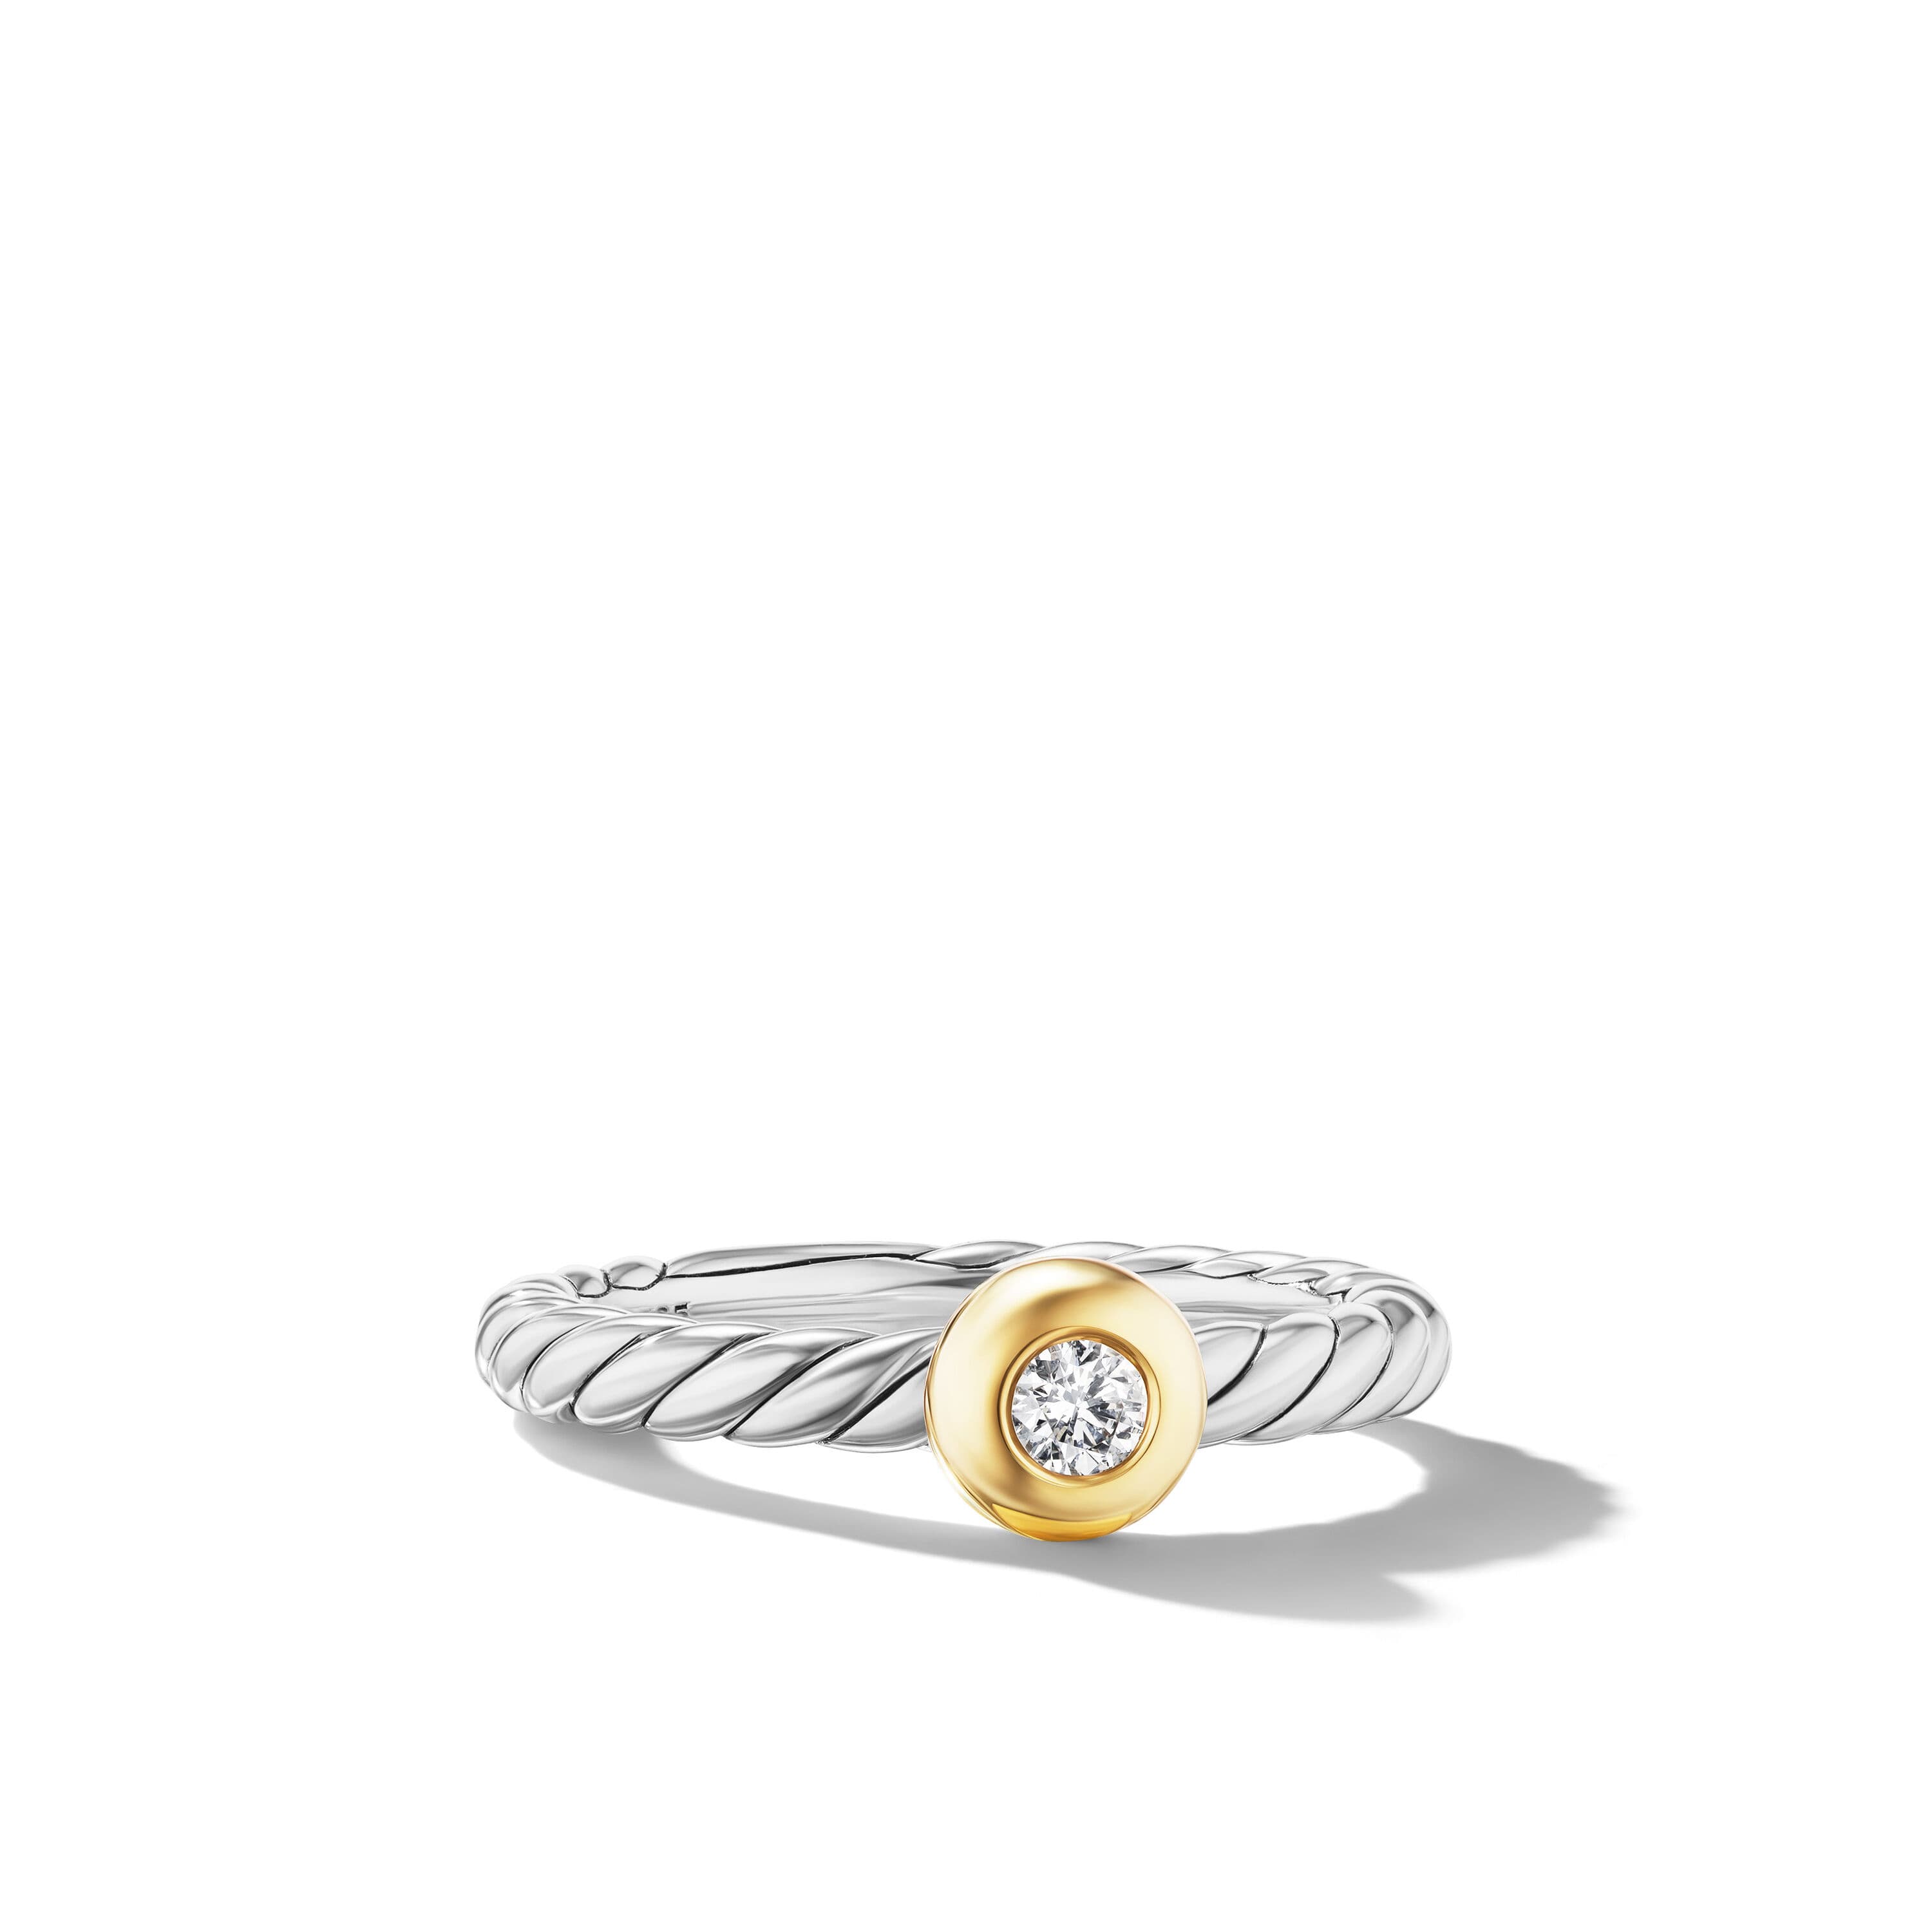 David Yurman Petite Cable Ring in Sterling Silver with 14K Yellow Gold and Diamond, Size 6